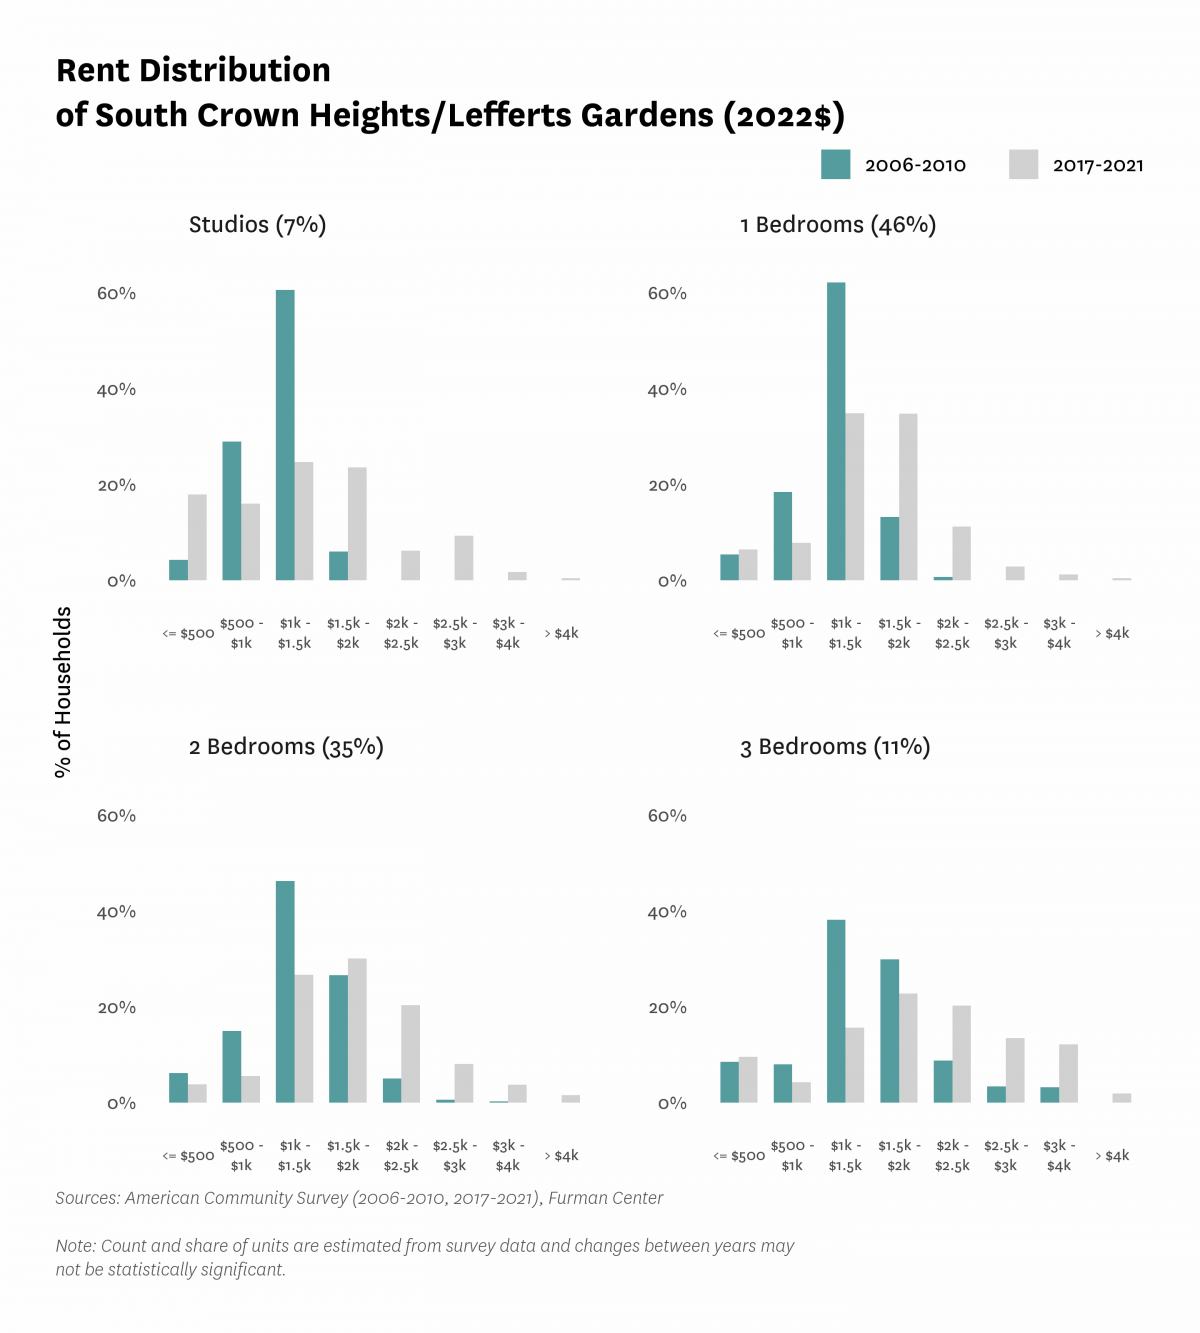 Graph showing the distribution of rents in South Crown Heights/Lefferts Gardens in both 2010 and 2017-2021.